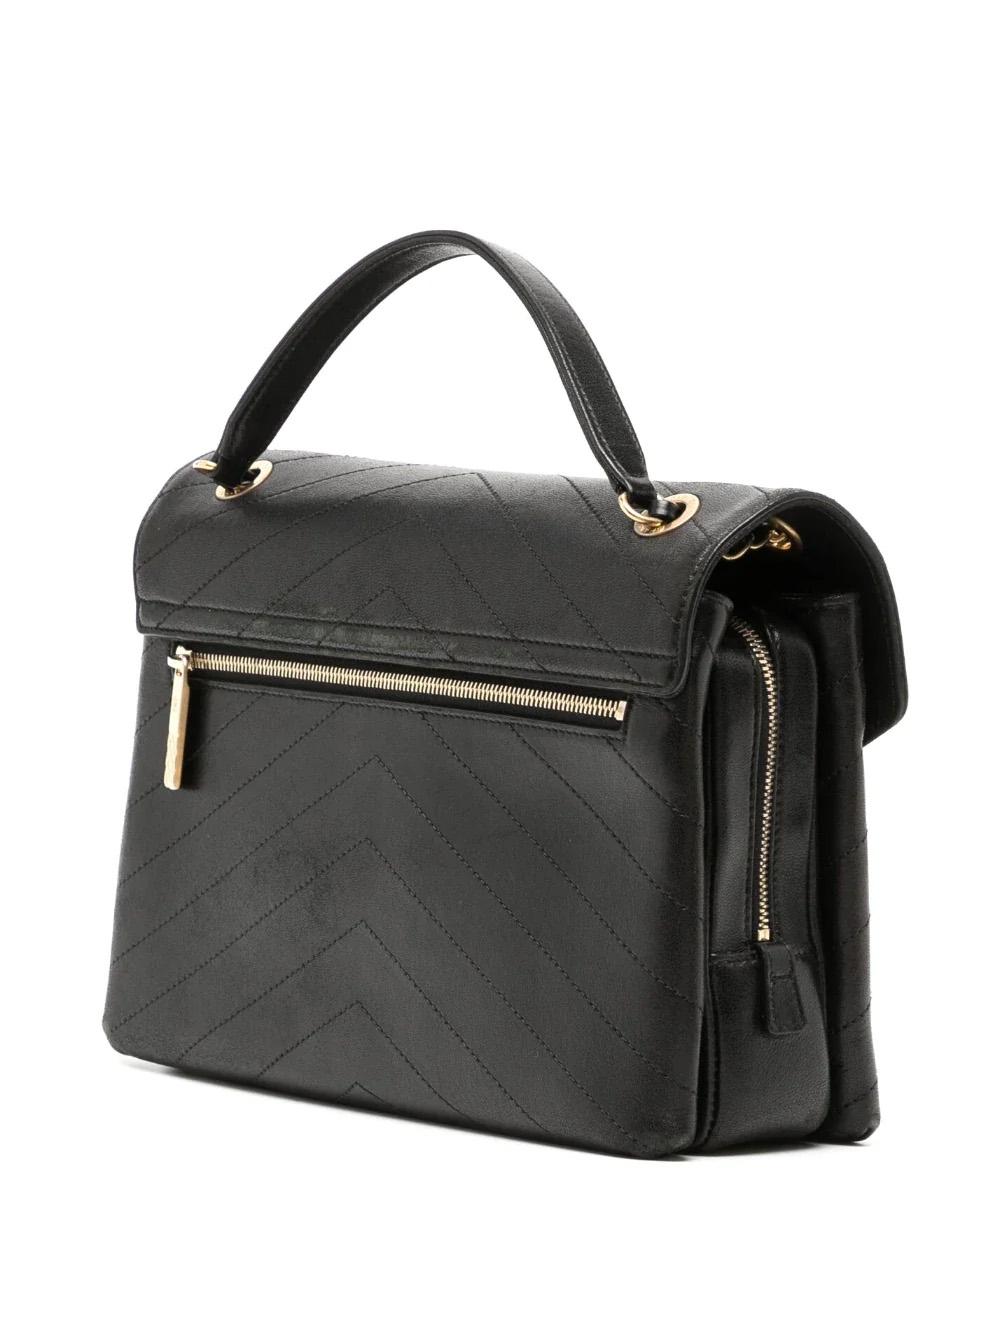 This black leather Chevron Flap Bag has a signature chevron quilting, leather and chain-link shoulder strap, front flap closure, signature interlocking CC turn-lock fastening, and gold-tone hardware. It also boasts a zip-fastening compartment,